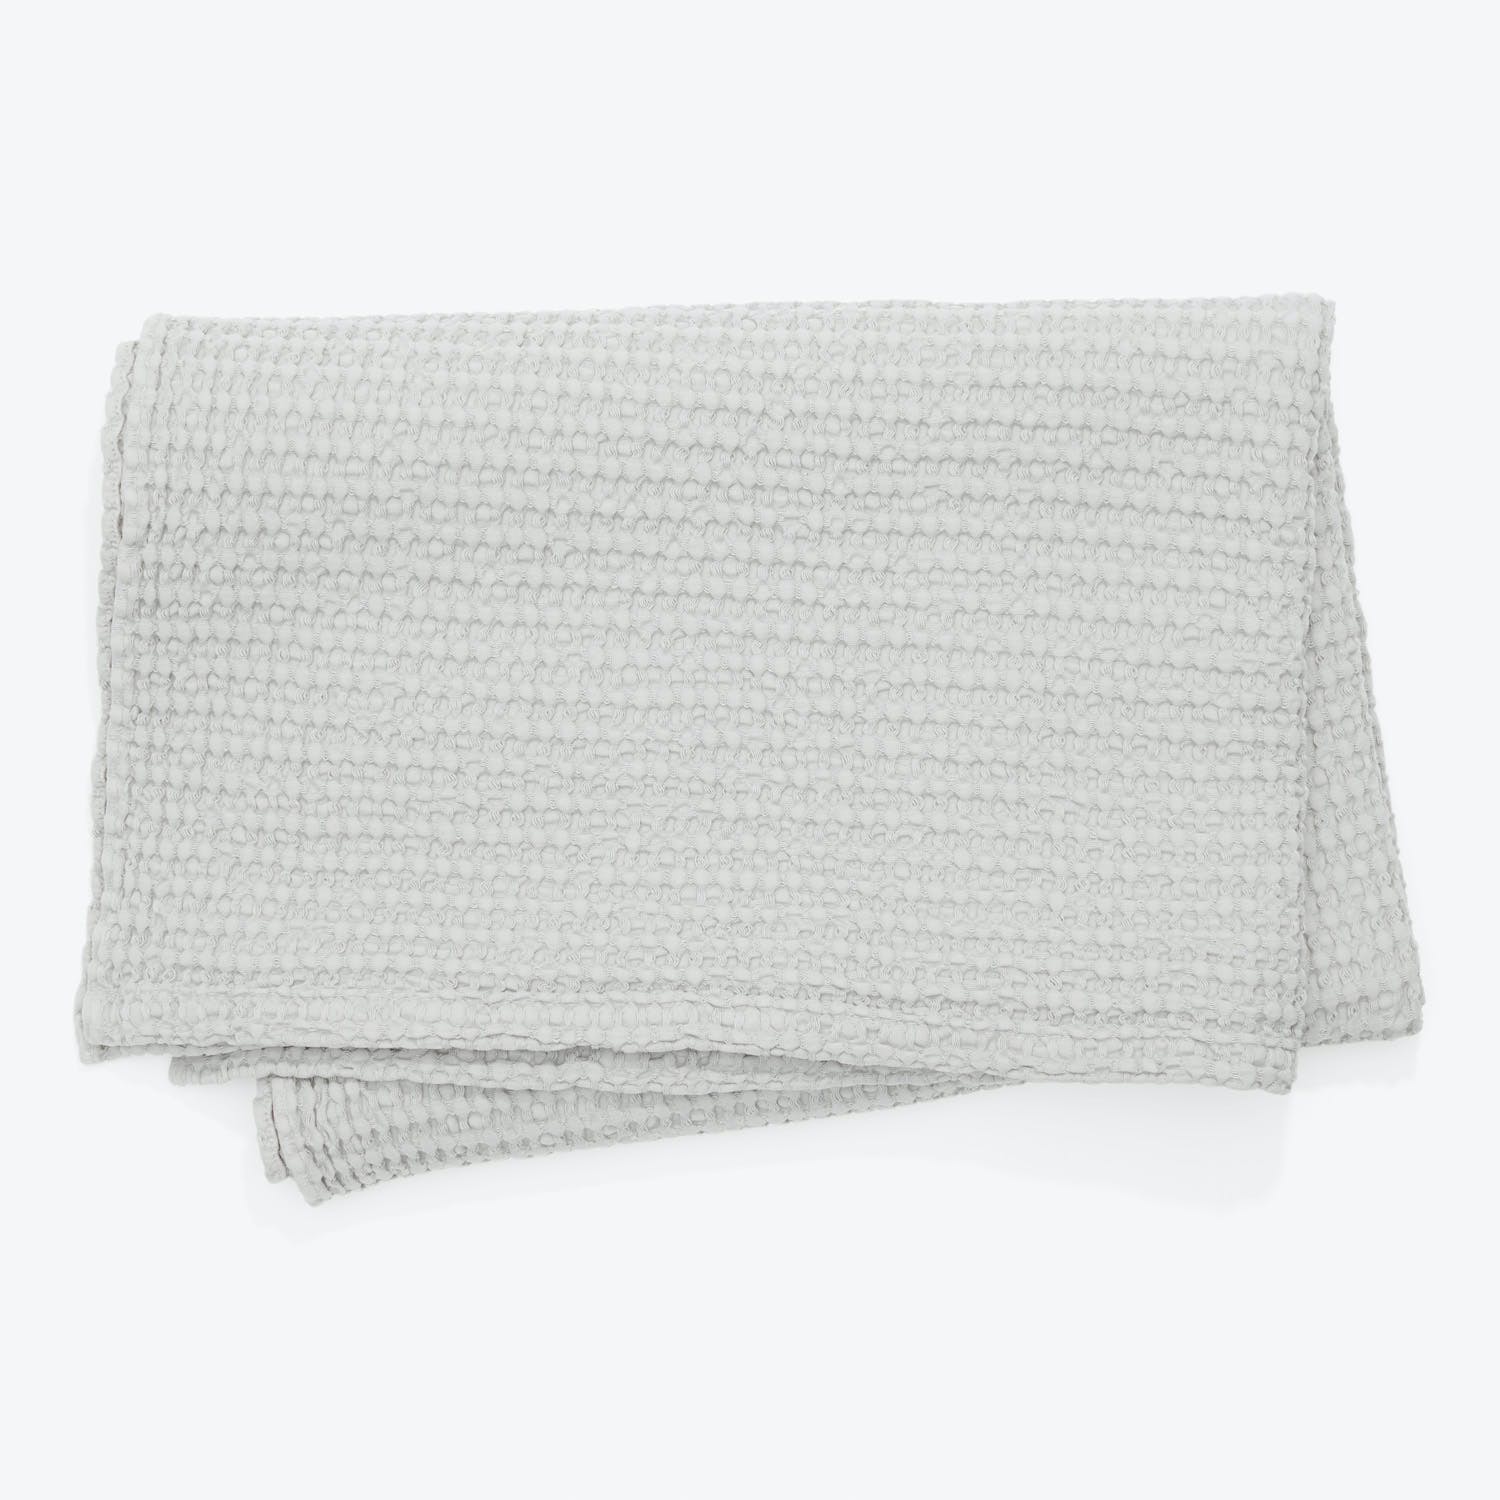 Folded light gray throw with a cozy tactile texture pattern.